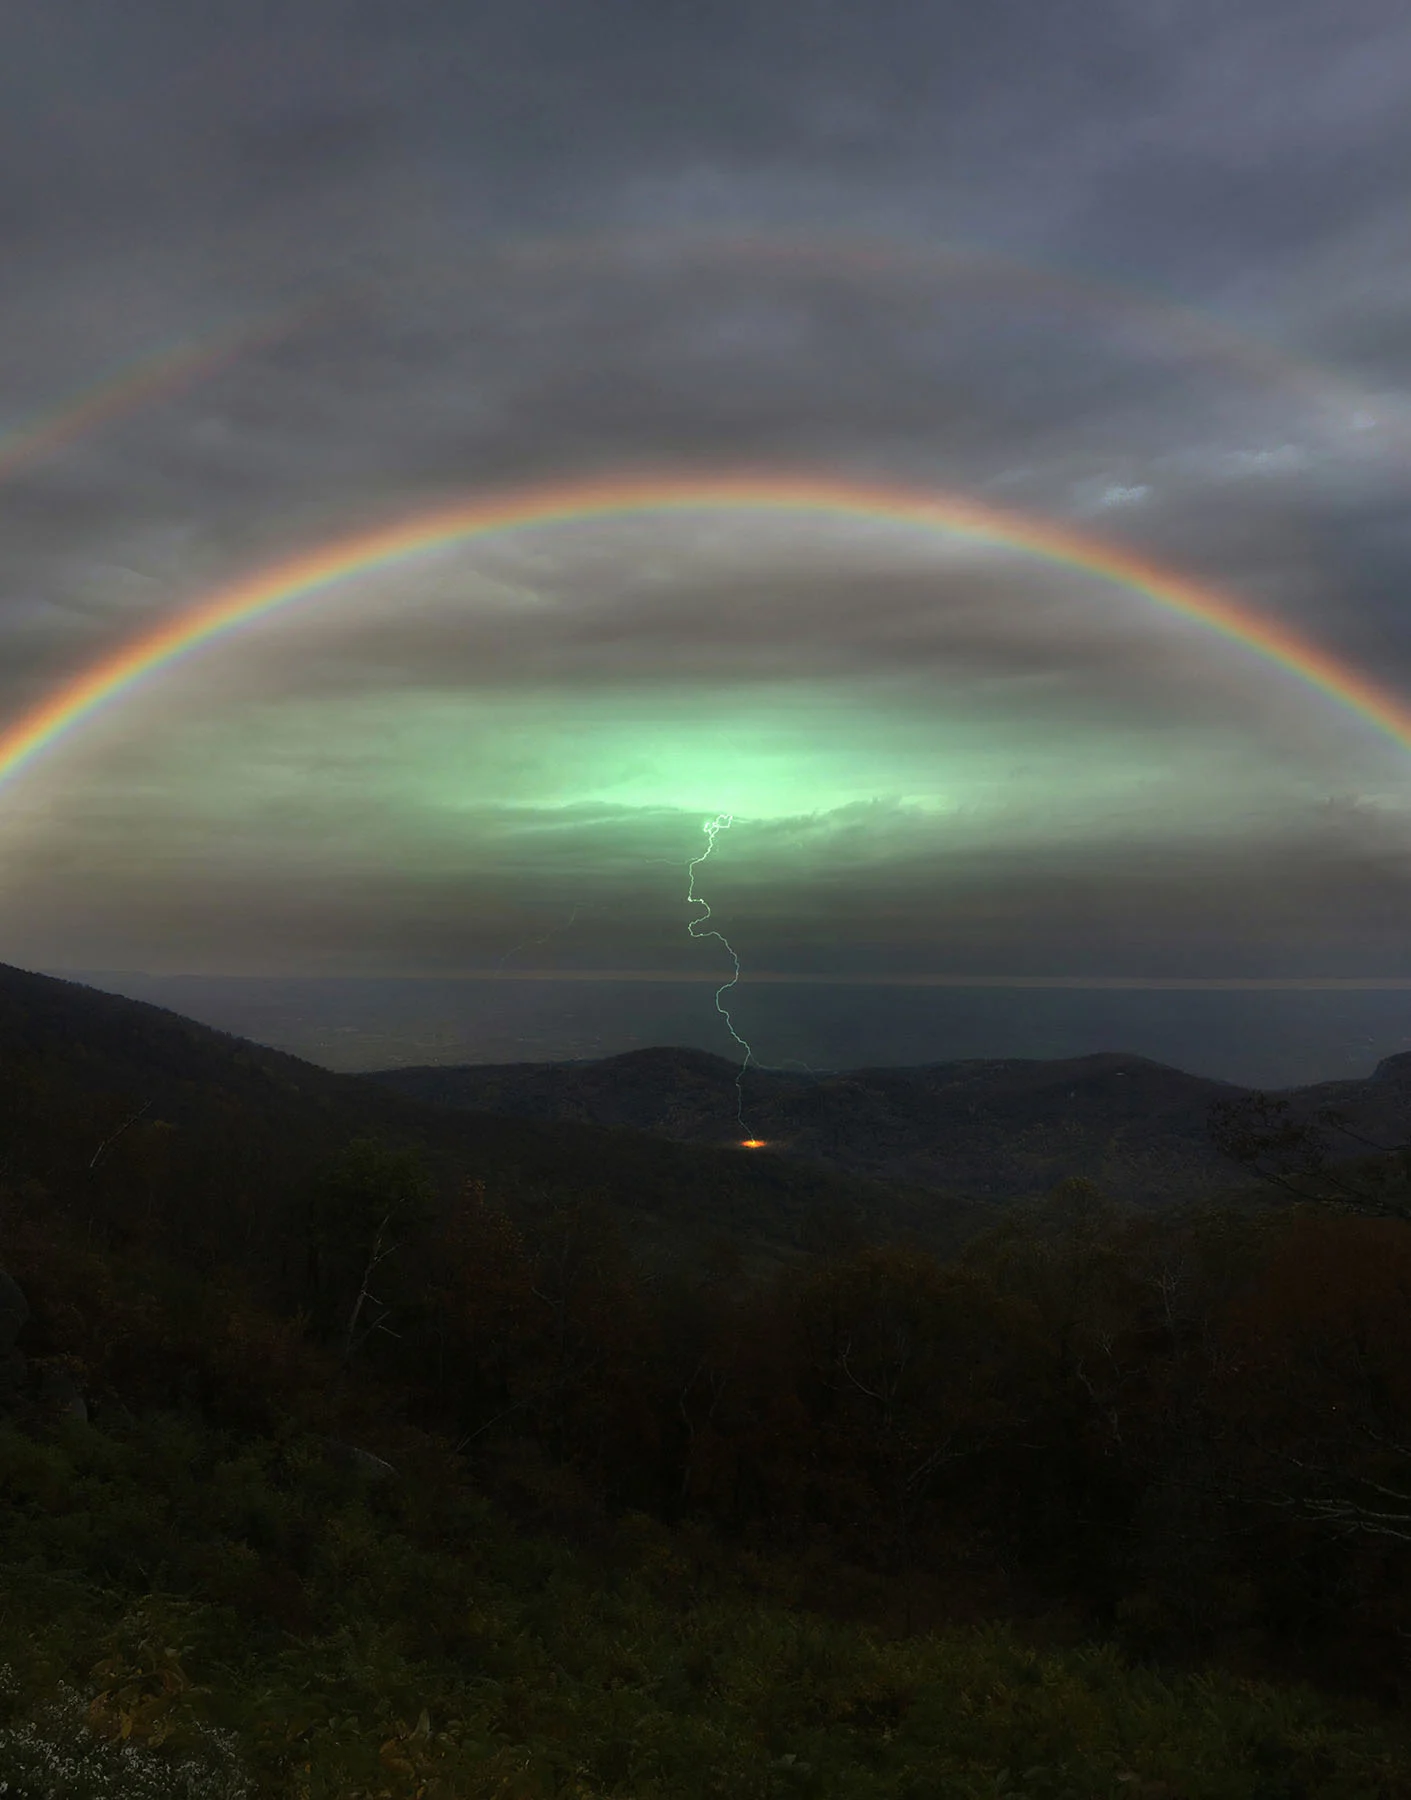 An overcast landscape photograph of a double rainbow over a lush mountainscape. At the center of the image is a single lightning bolt making contact with the earth. 